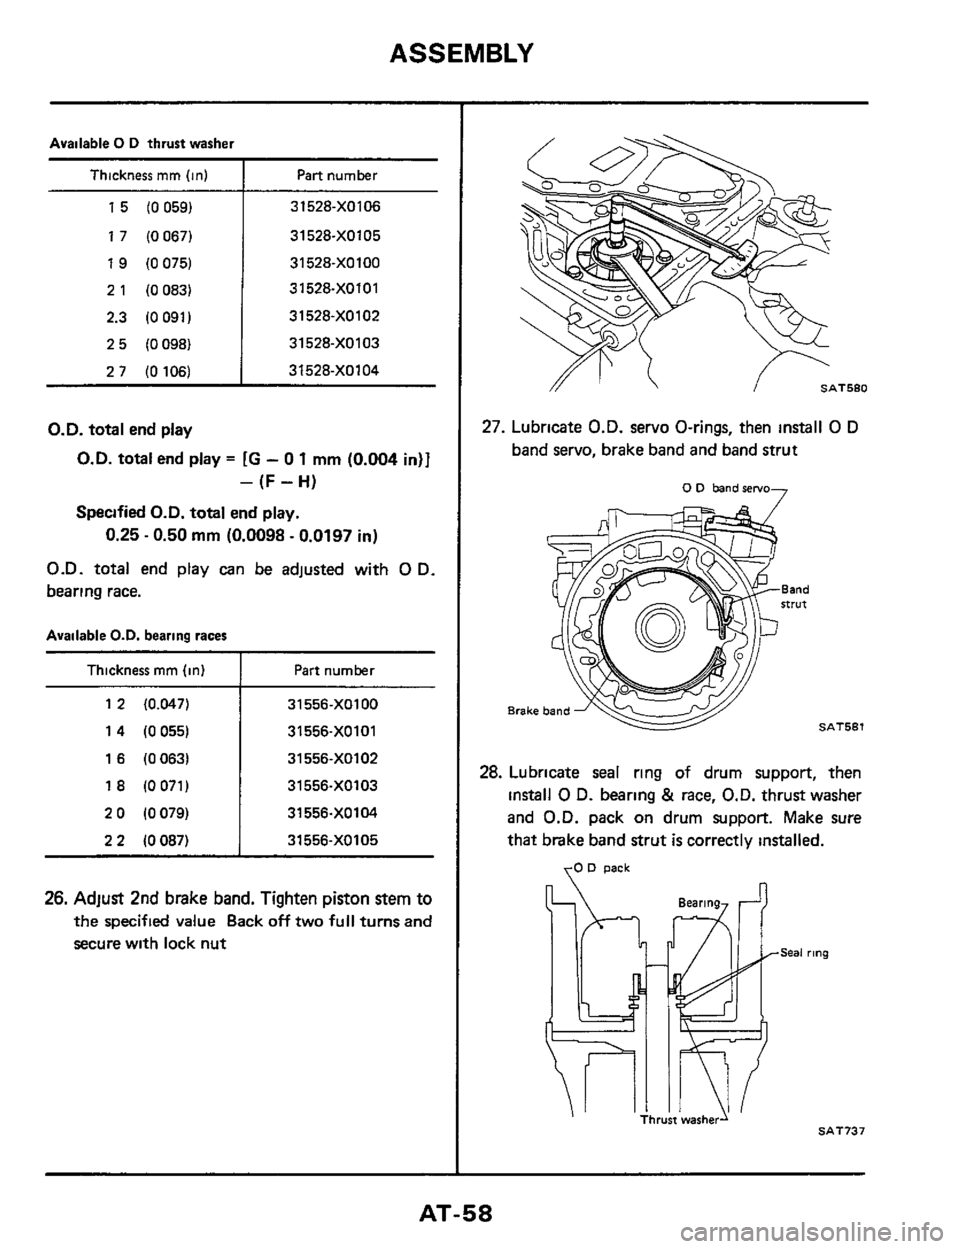 NISSAN 300ZX 1984 Z31 Automatic Transmission Repair Manual ASSEMBLY 
15 (0 059) 
17 (0 067) 
19 (0 075) 
2 1 (0 083) 
2.3 (0 091) 
25 (0098) 
2 7 (0 106) 
Available 0 D thrust washer 
3 1528-XO106 
31  528-XO105 
31528-X0100 
31  528-X0101 
31 528-XO102 
3152